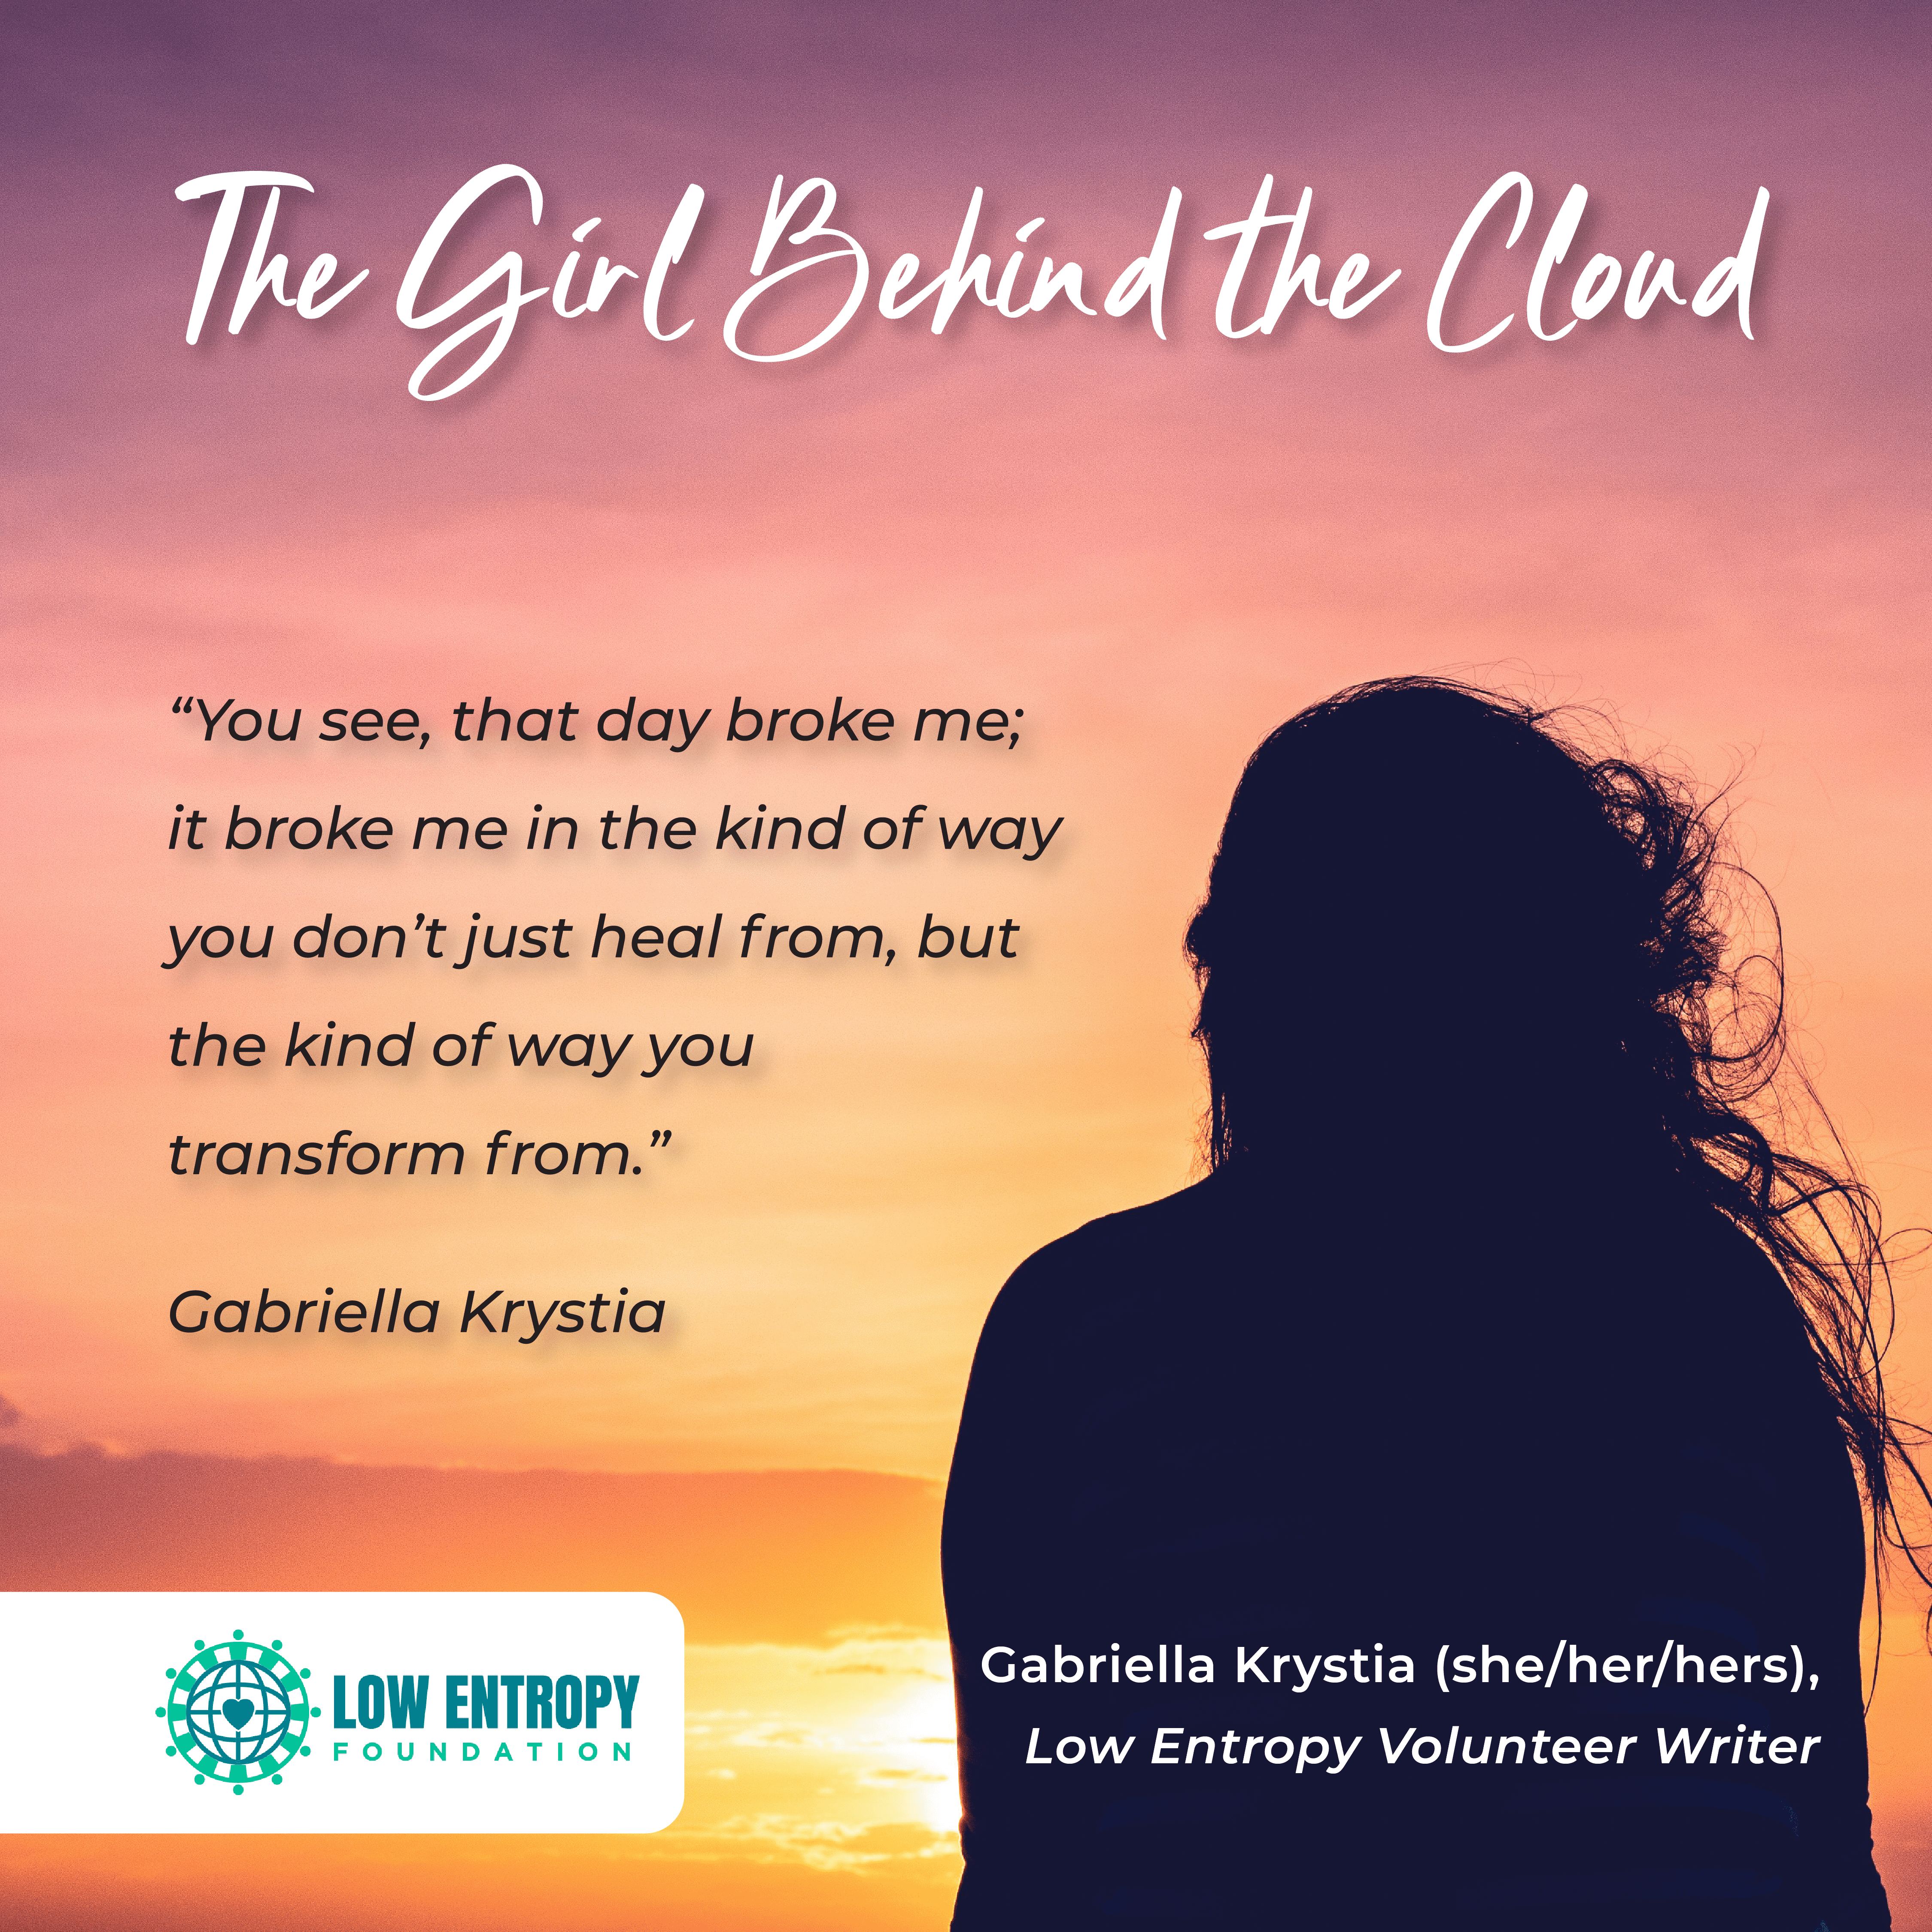 The Girl Behind the Cloud